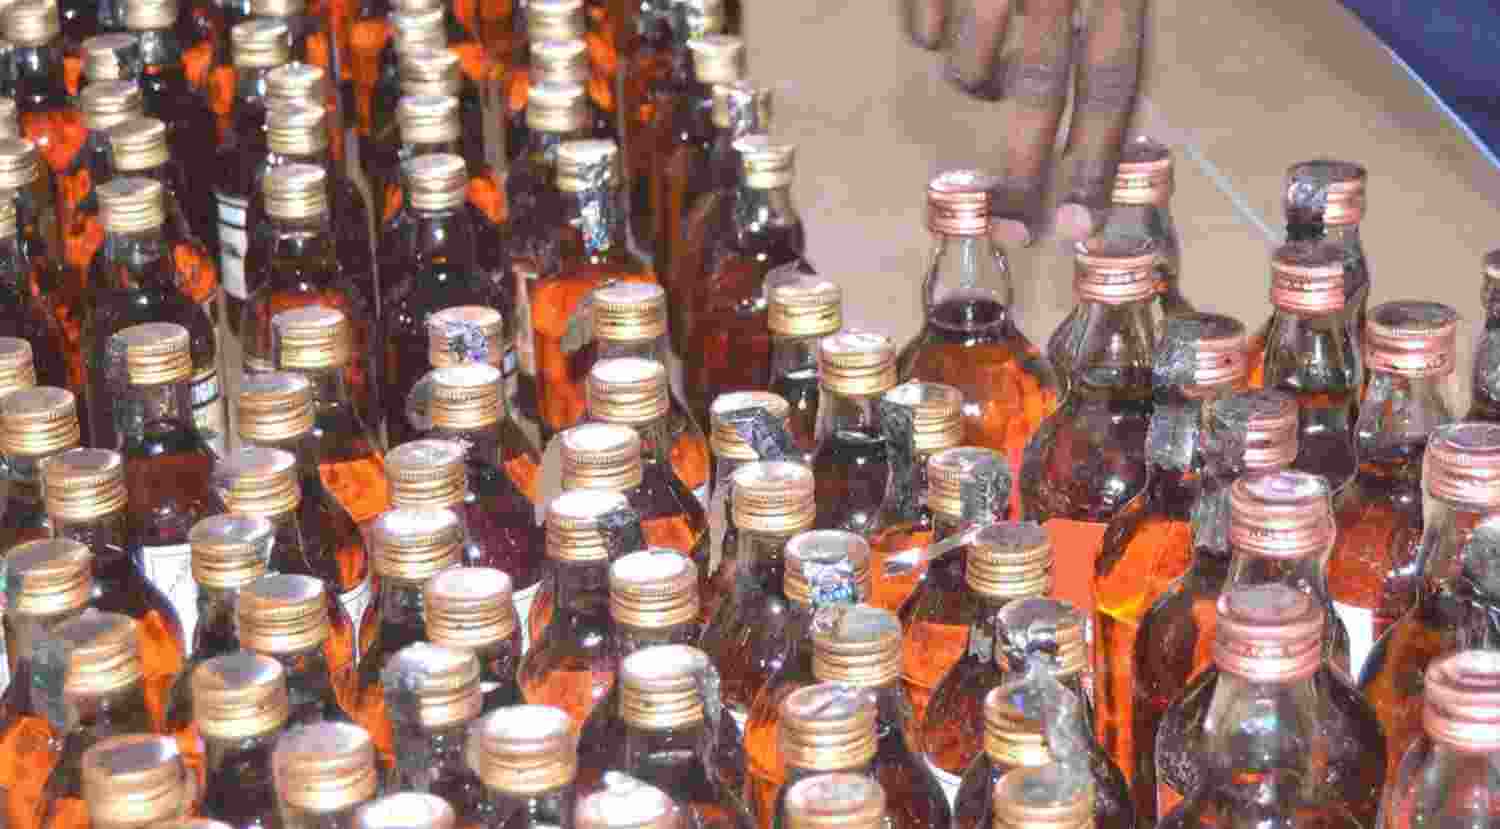 Tamil Nadu: 25 dead, 60 hospitalised from toxic alcohol